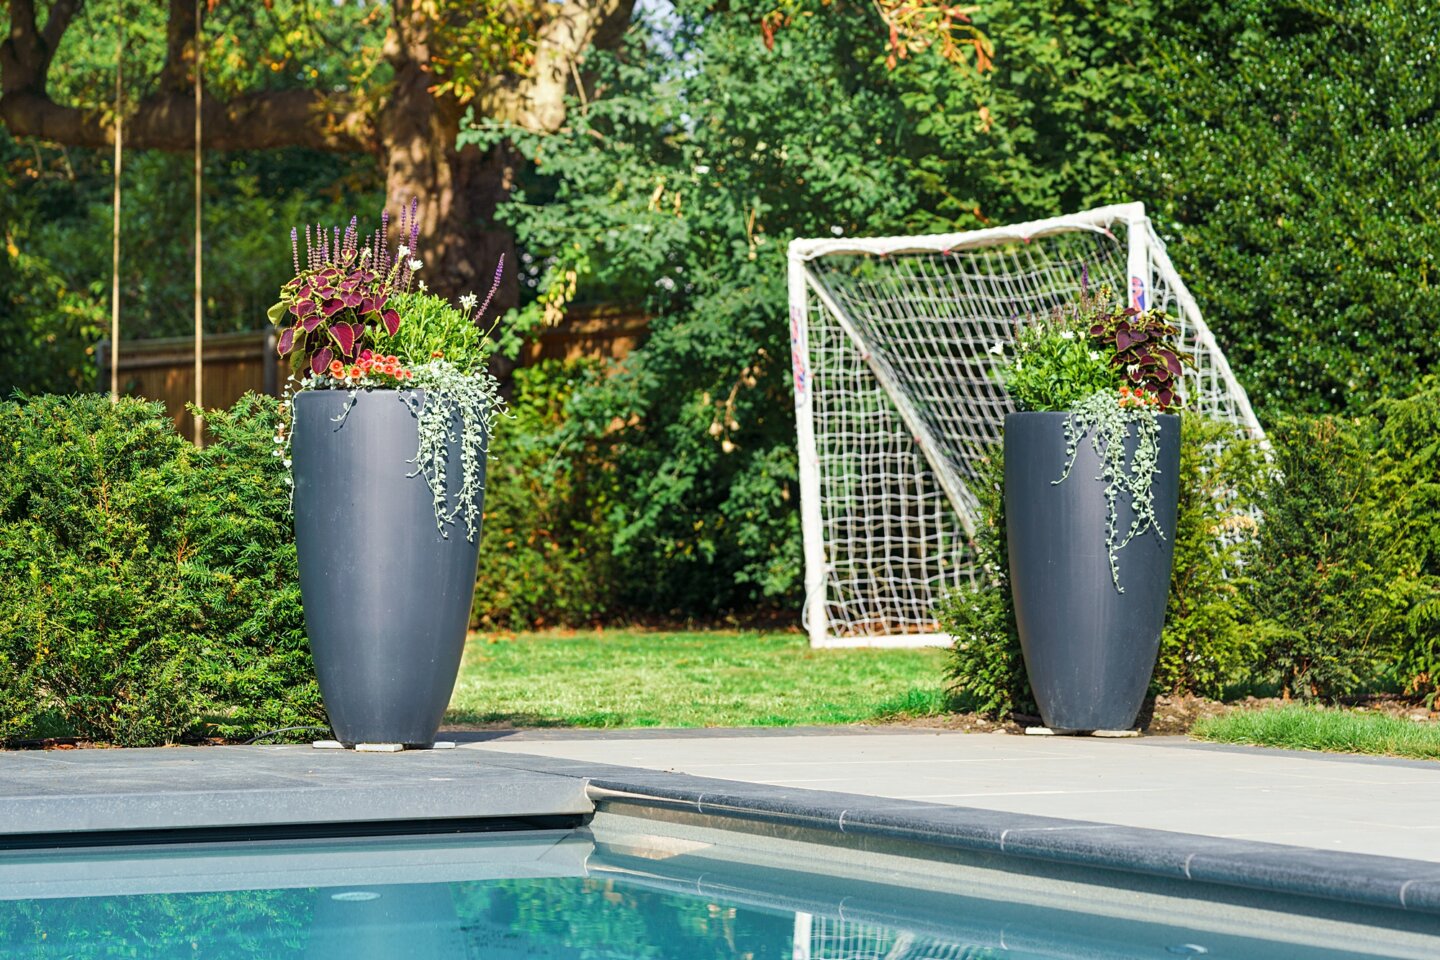 Tall planters as a garden feature with lawn area and football goalposts beyond